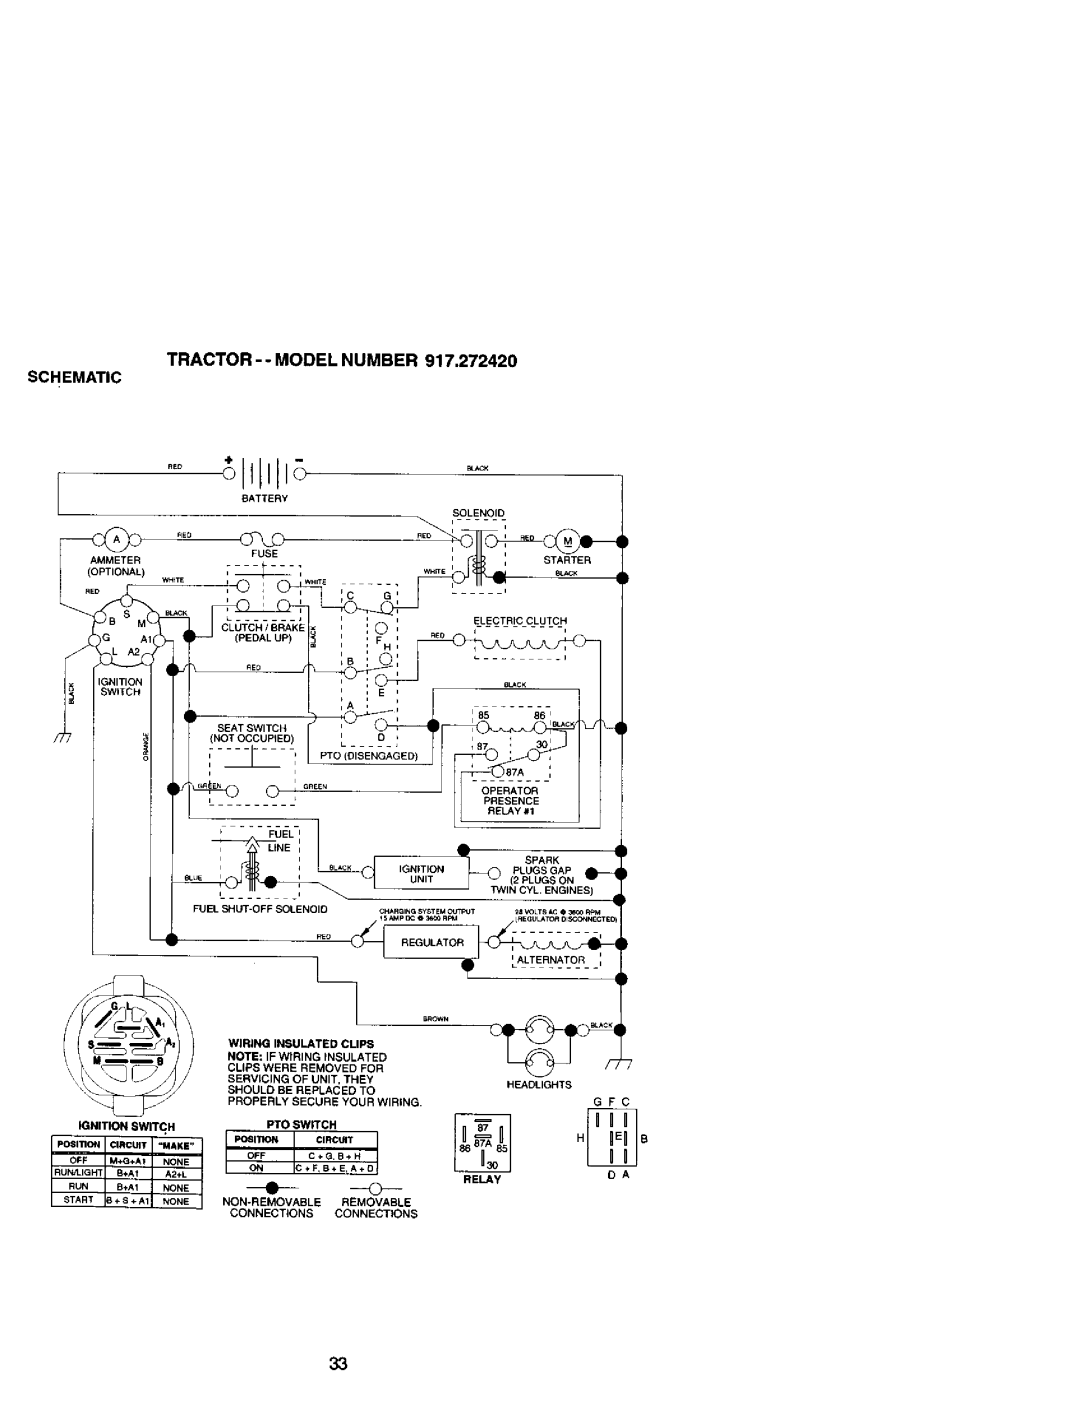 Craftsman 917.27242 owner manual I #L_-.;_,_;,_L, i- l, _ - _, J _ _, B+B+Ai, None, Non-Removable, Connections 